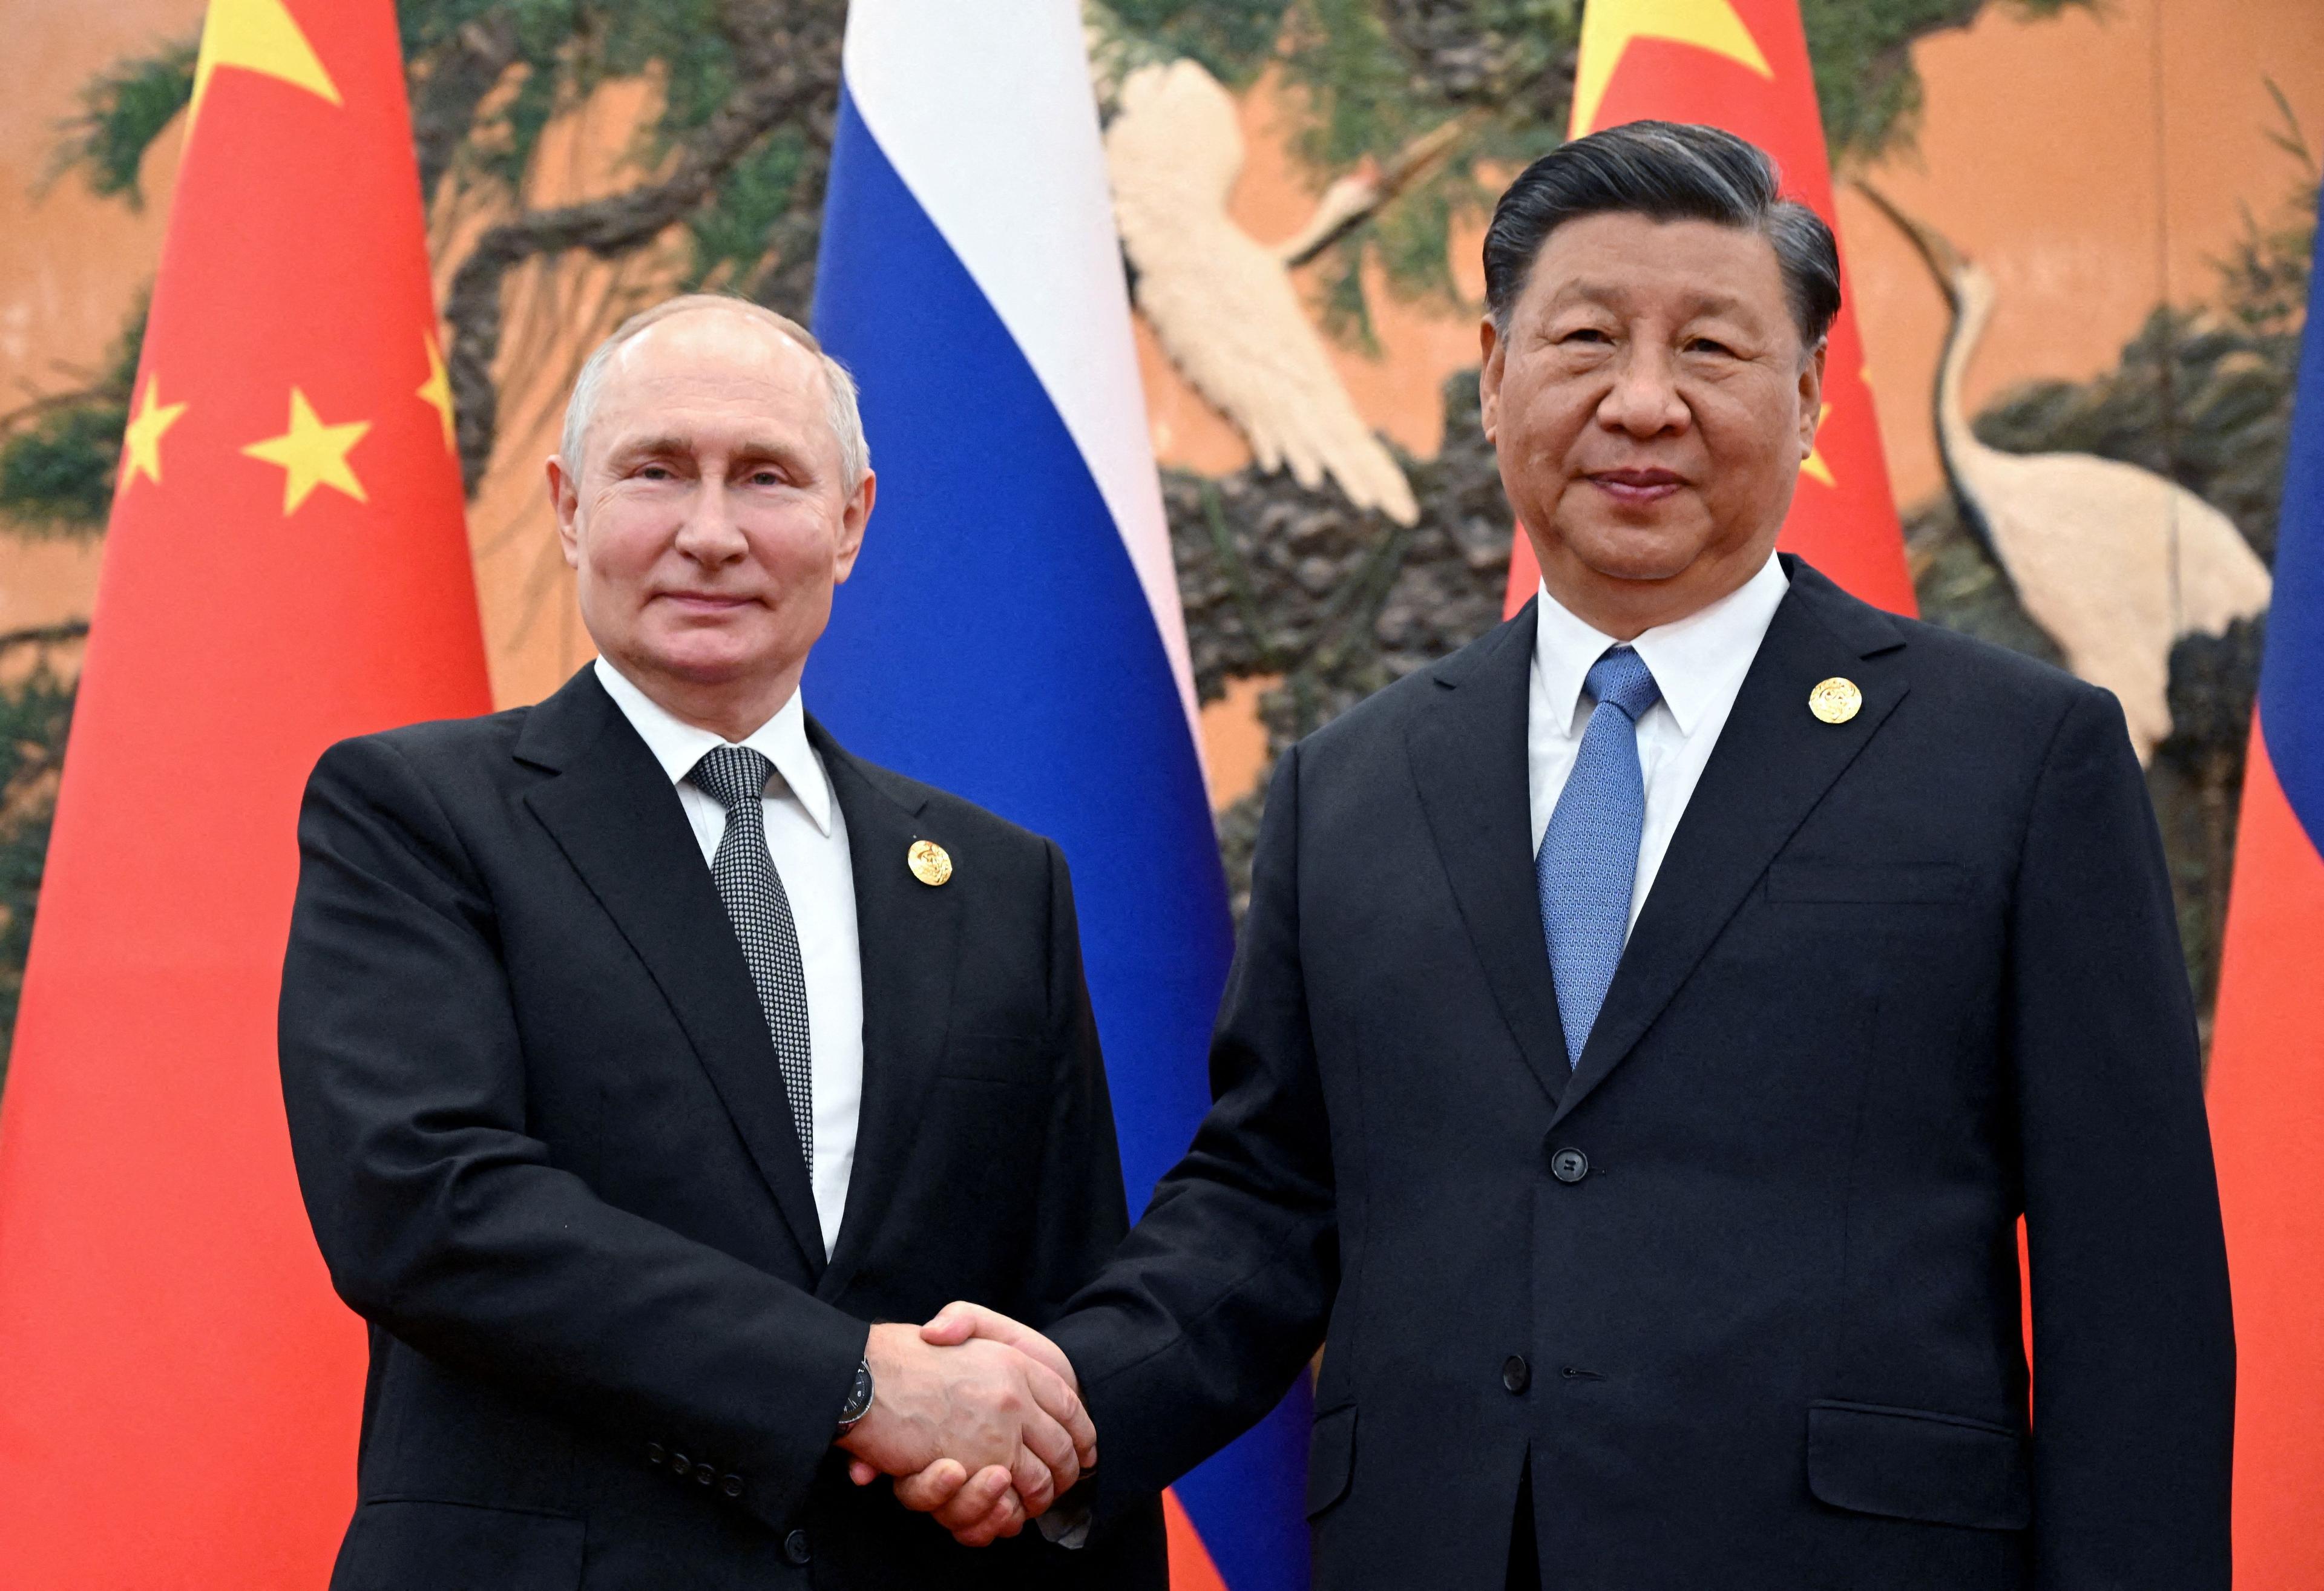 Putin is expected to visit China in 2024